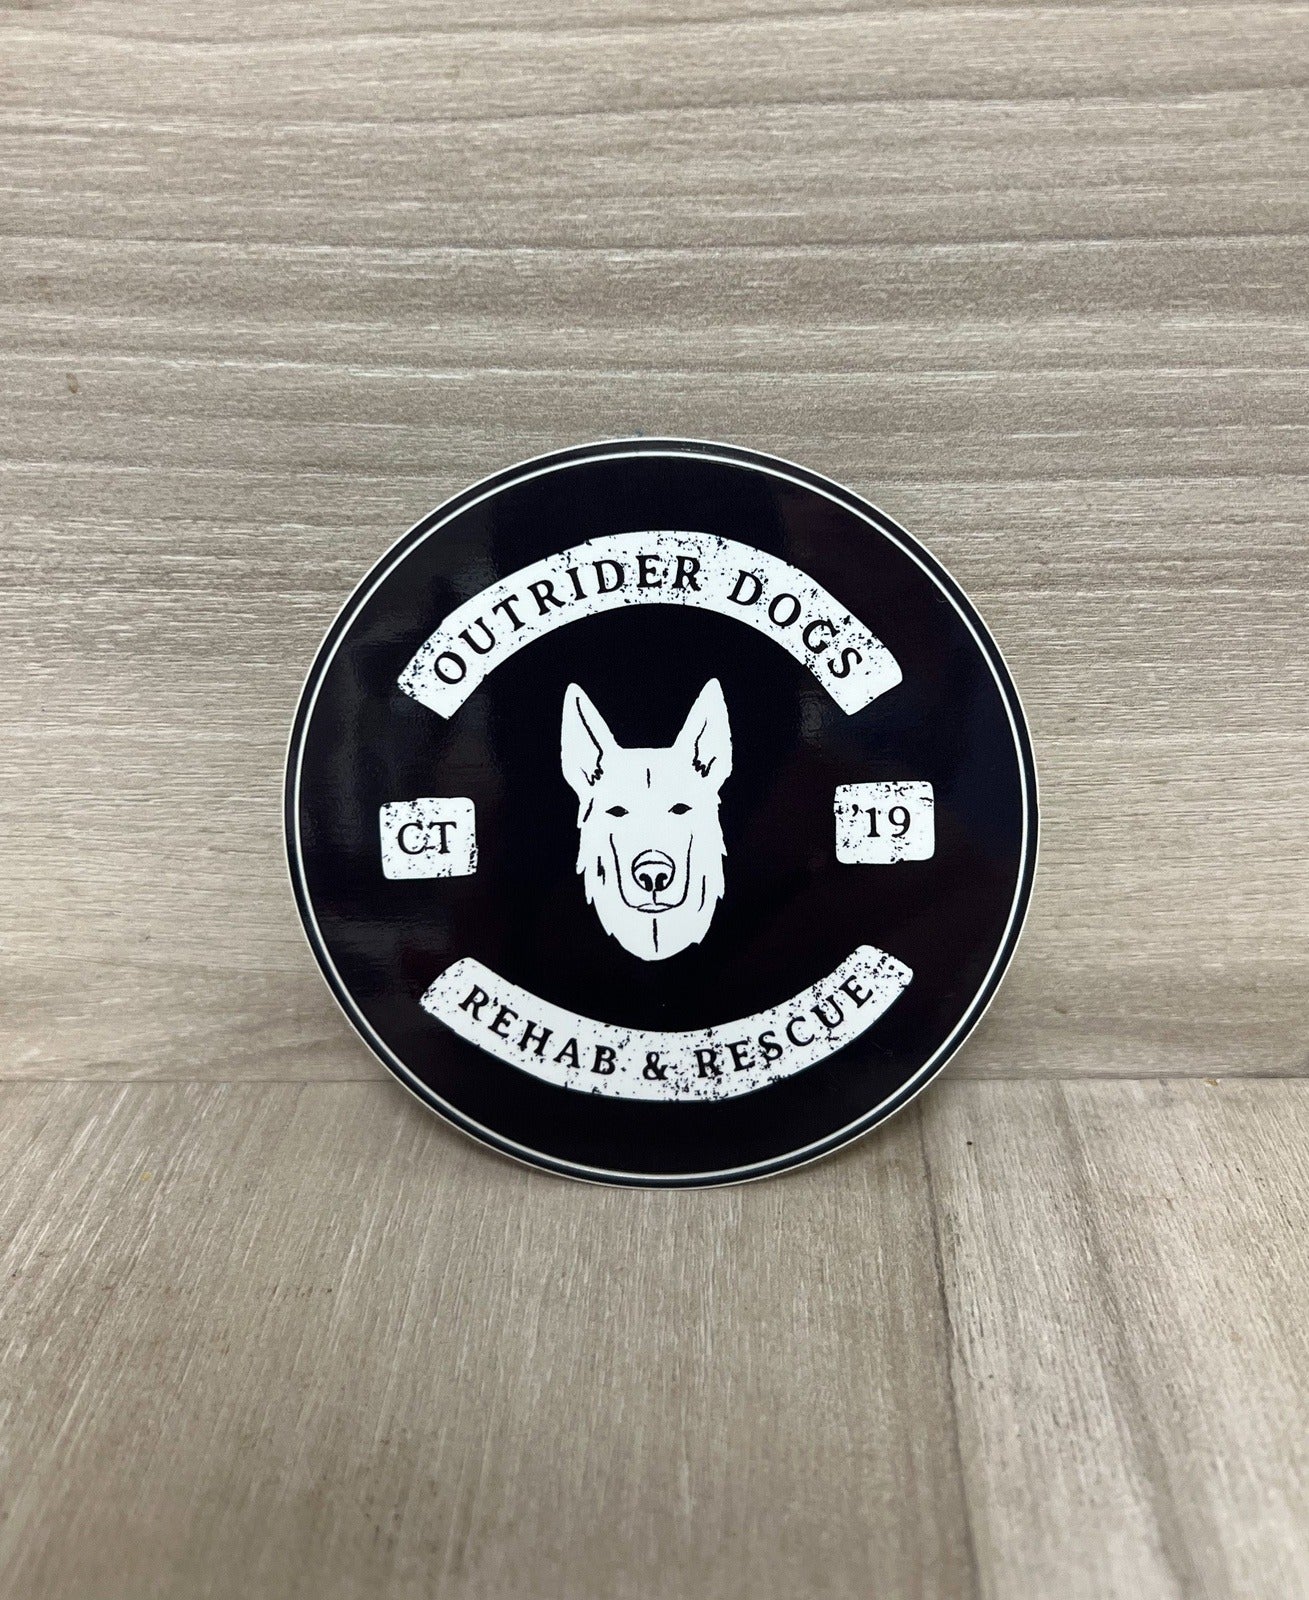 Outrider Dogs Rehab & Rescue Sticker